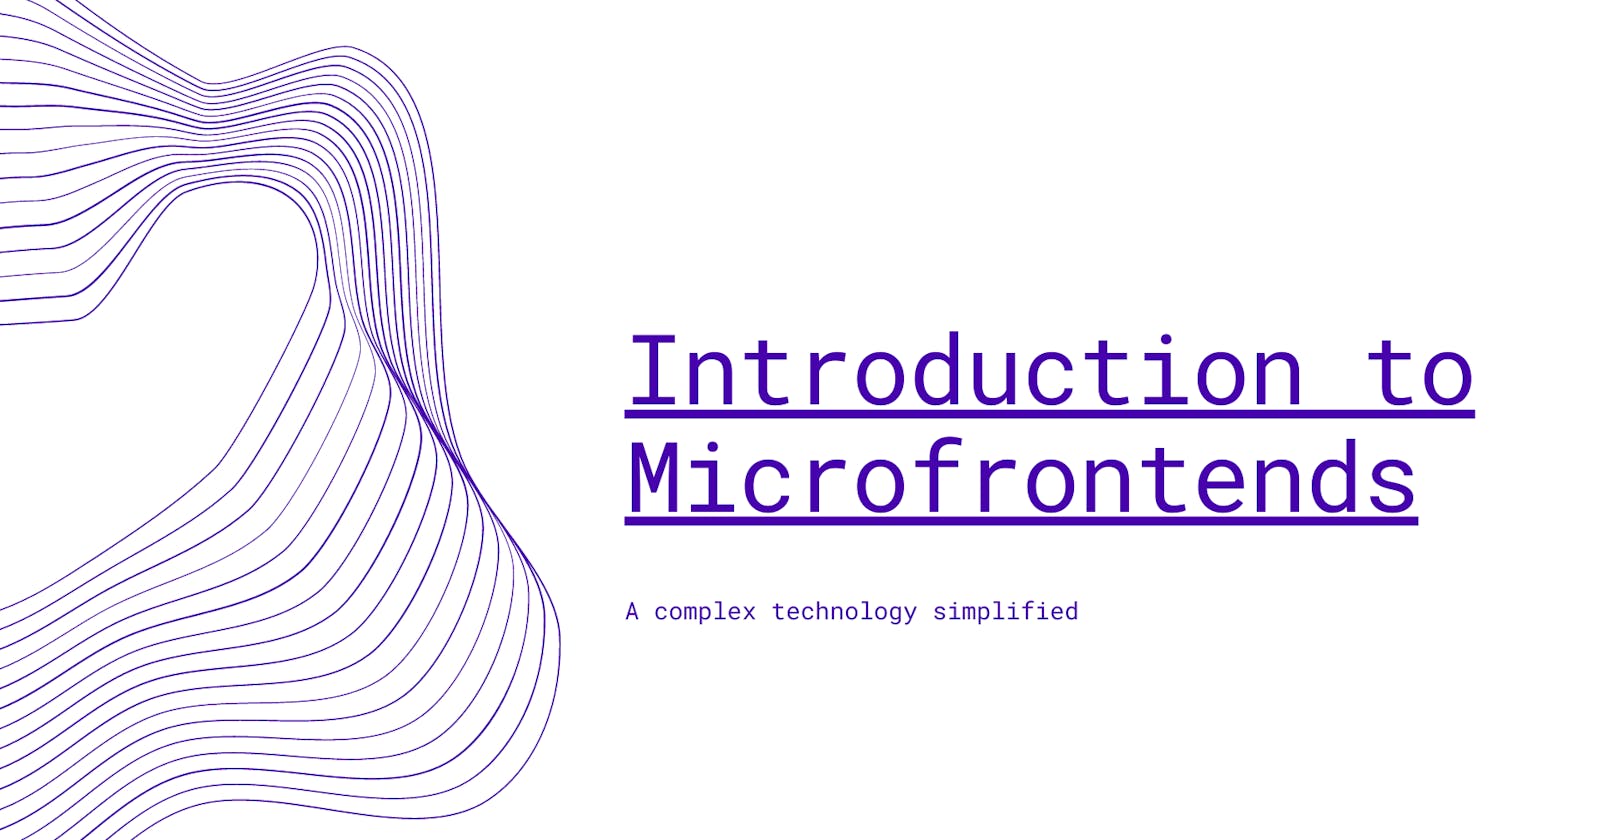 Introduction to Microfrontends